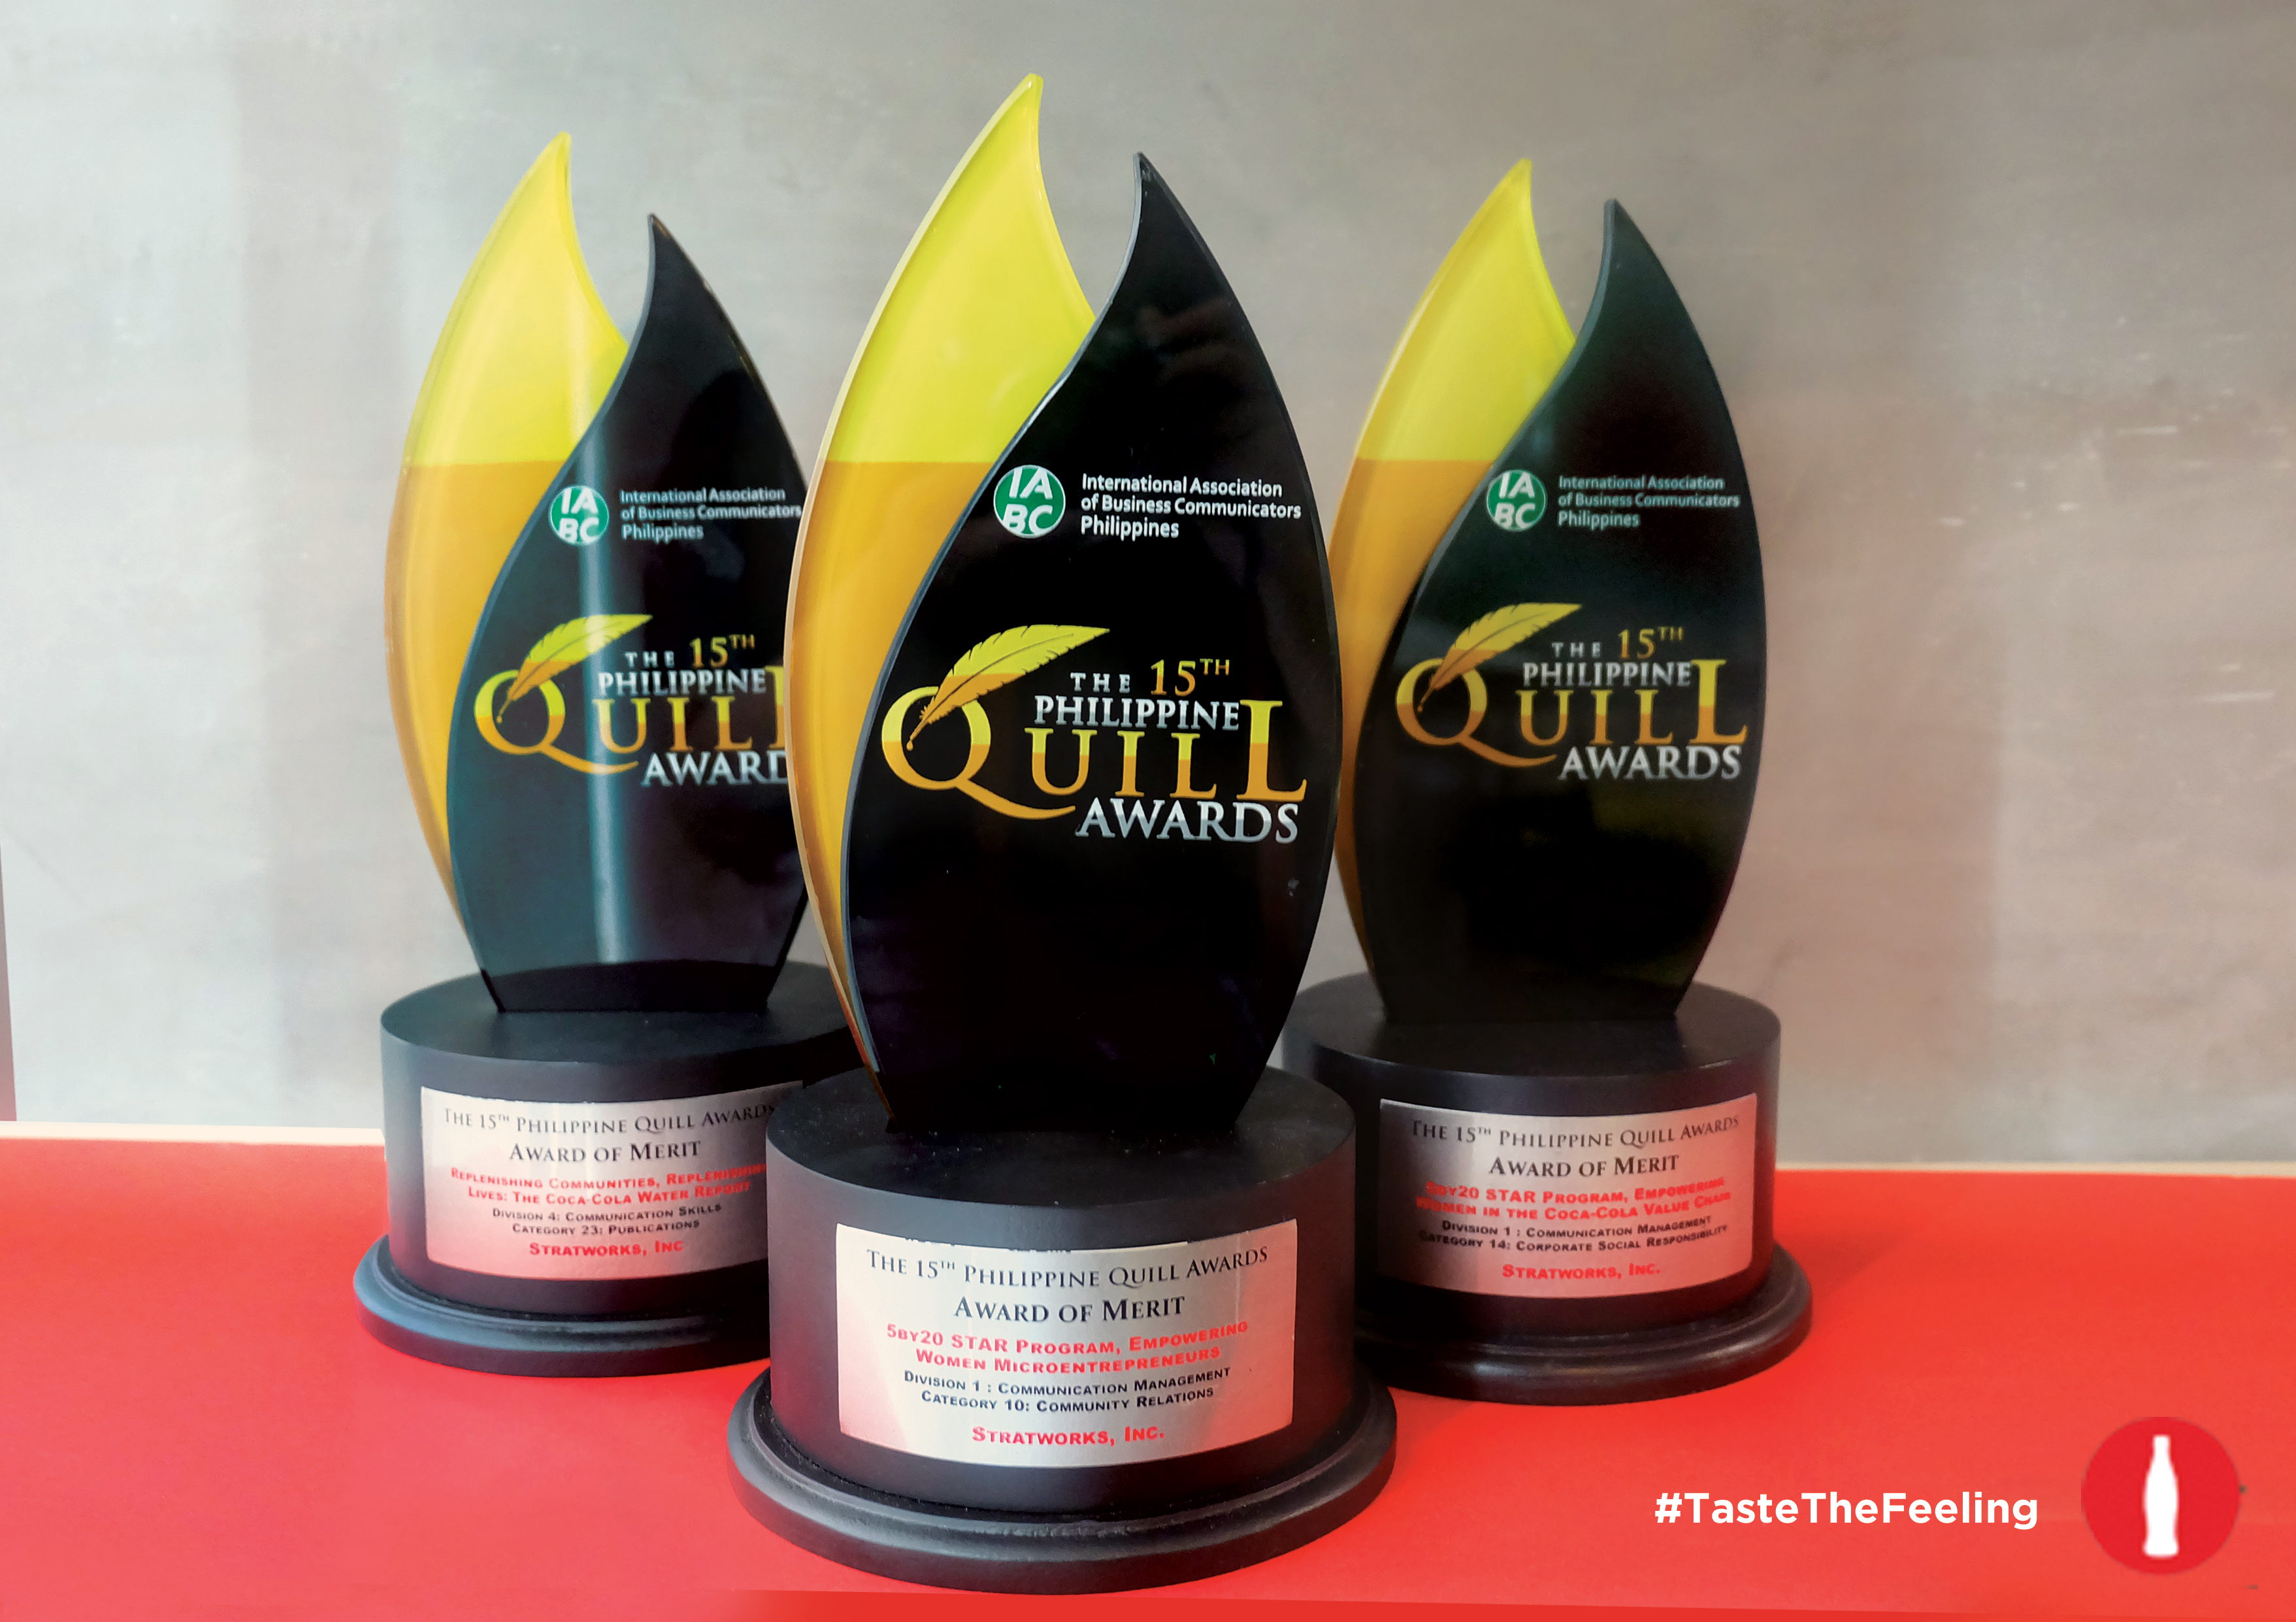 Sustainability programs of CocaCola honored at 15th Philippine Quill